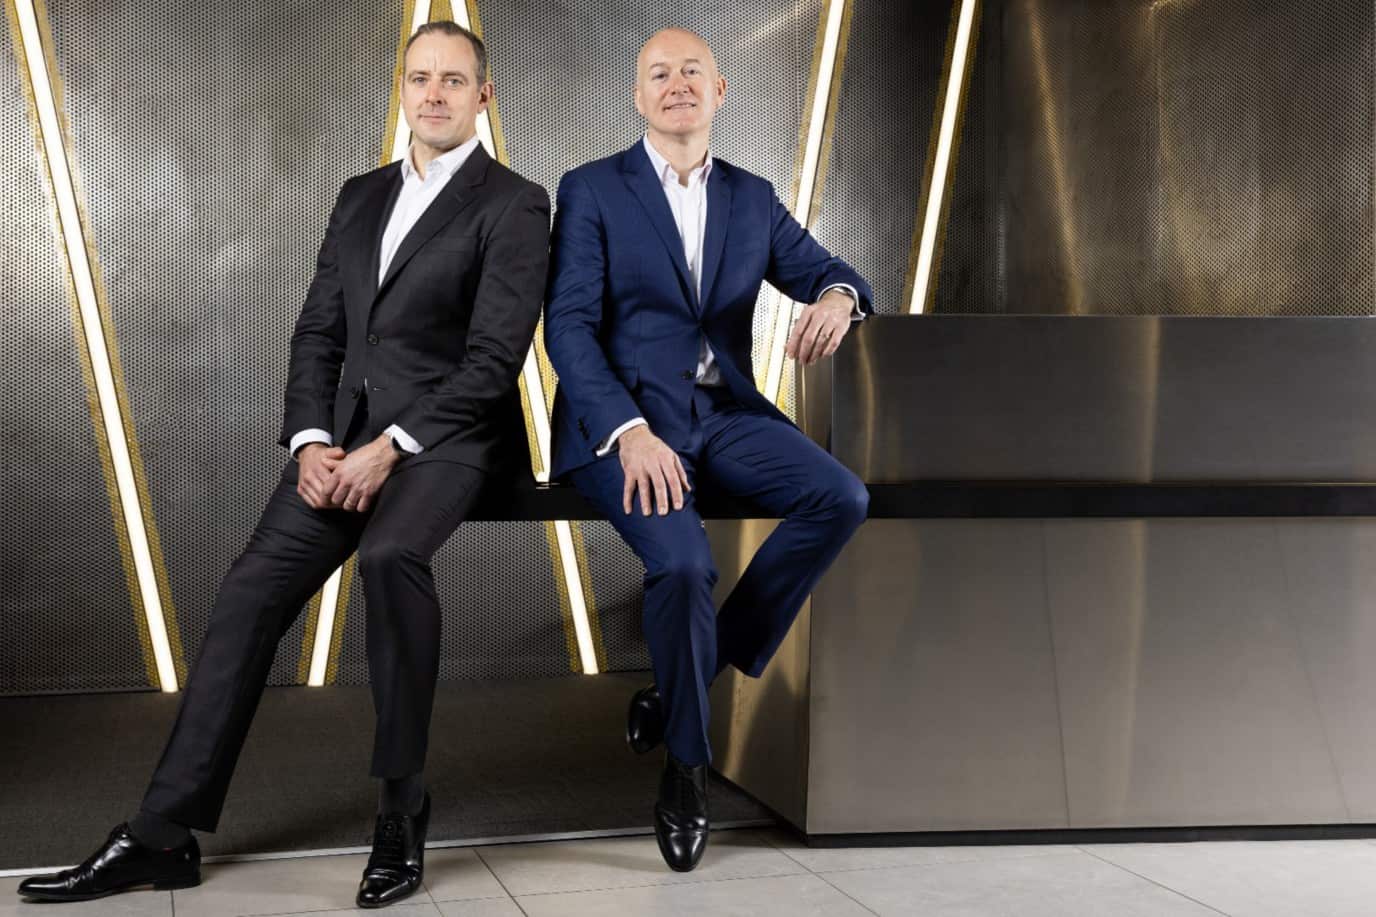 A photo of Aidan Lawlor (left) and Conor O’Dwyer (right) join EY Law Ireland.EY Ireland is pleased to announce that Aidan Lawlor and Conor O'Dwyer have joined EY Law Ireland as Equity Partners.